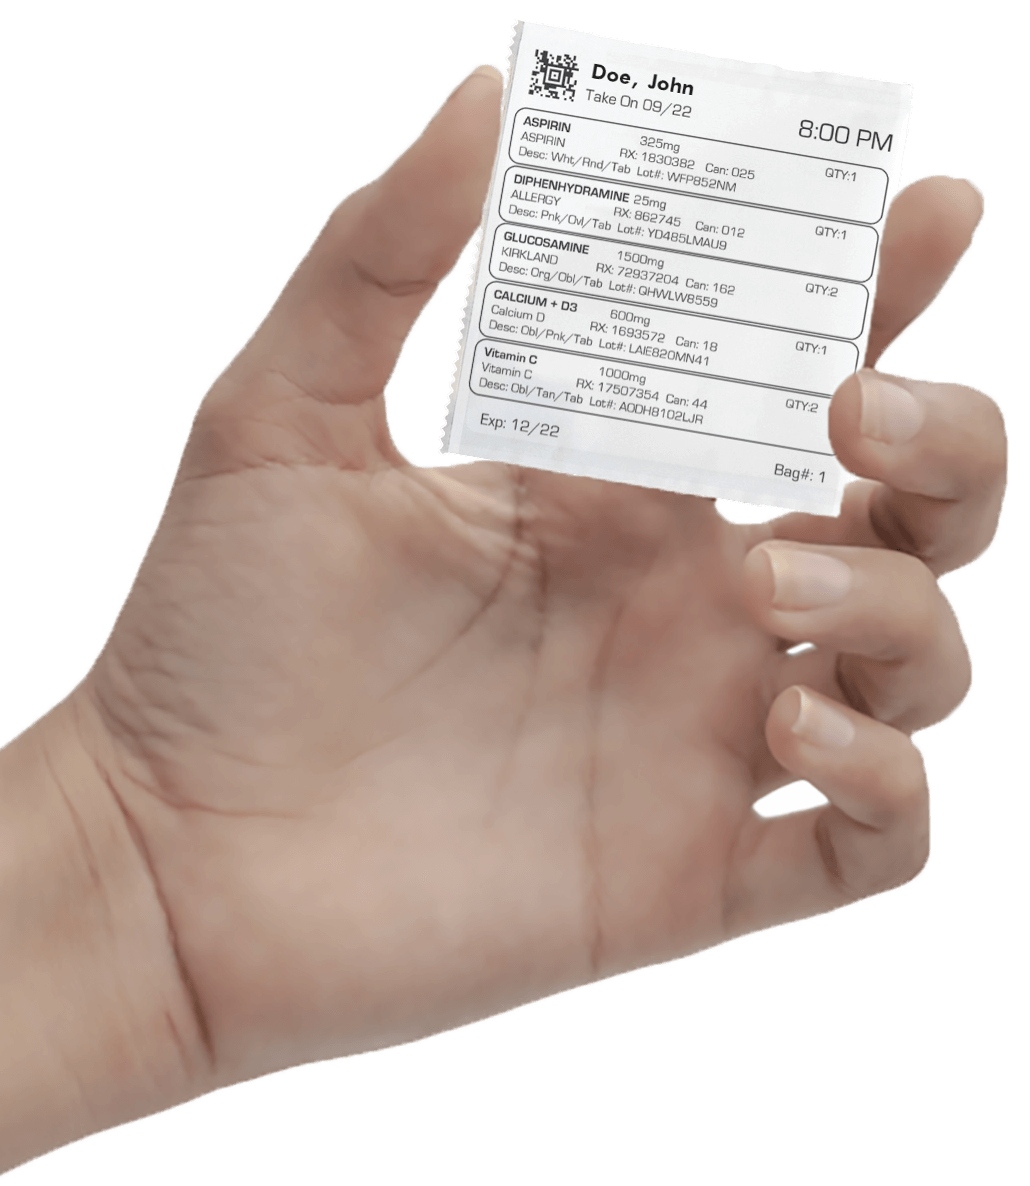 Hand holding a personalized  medication pack called SyncRx from Gibson Pharmacy